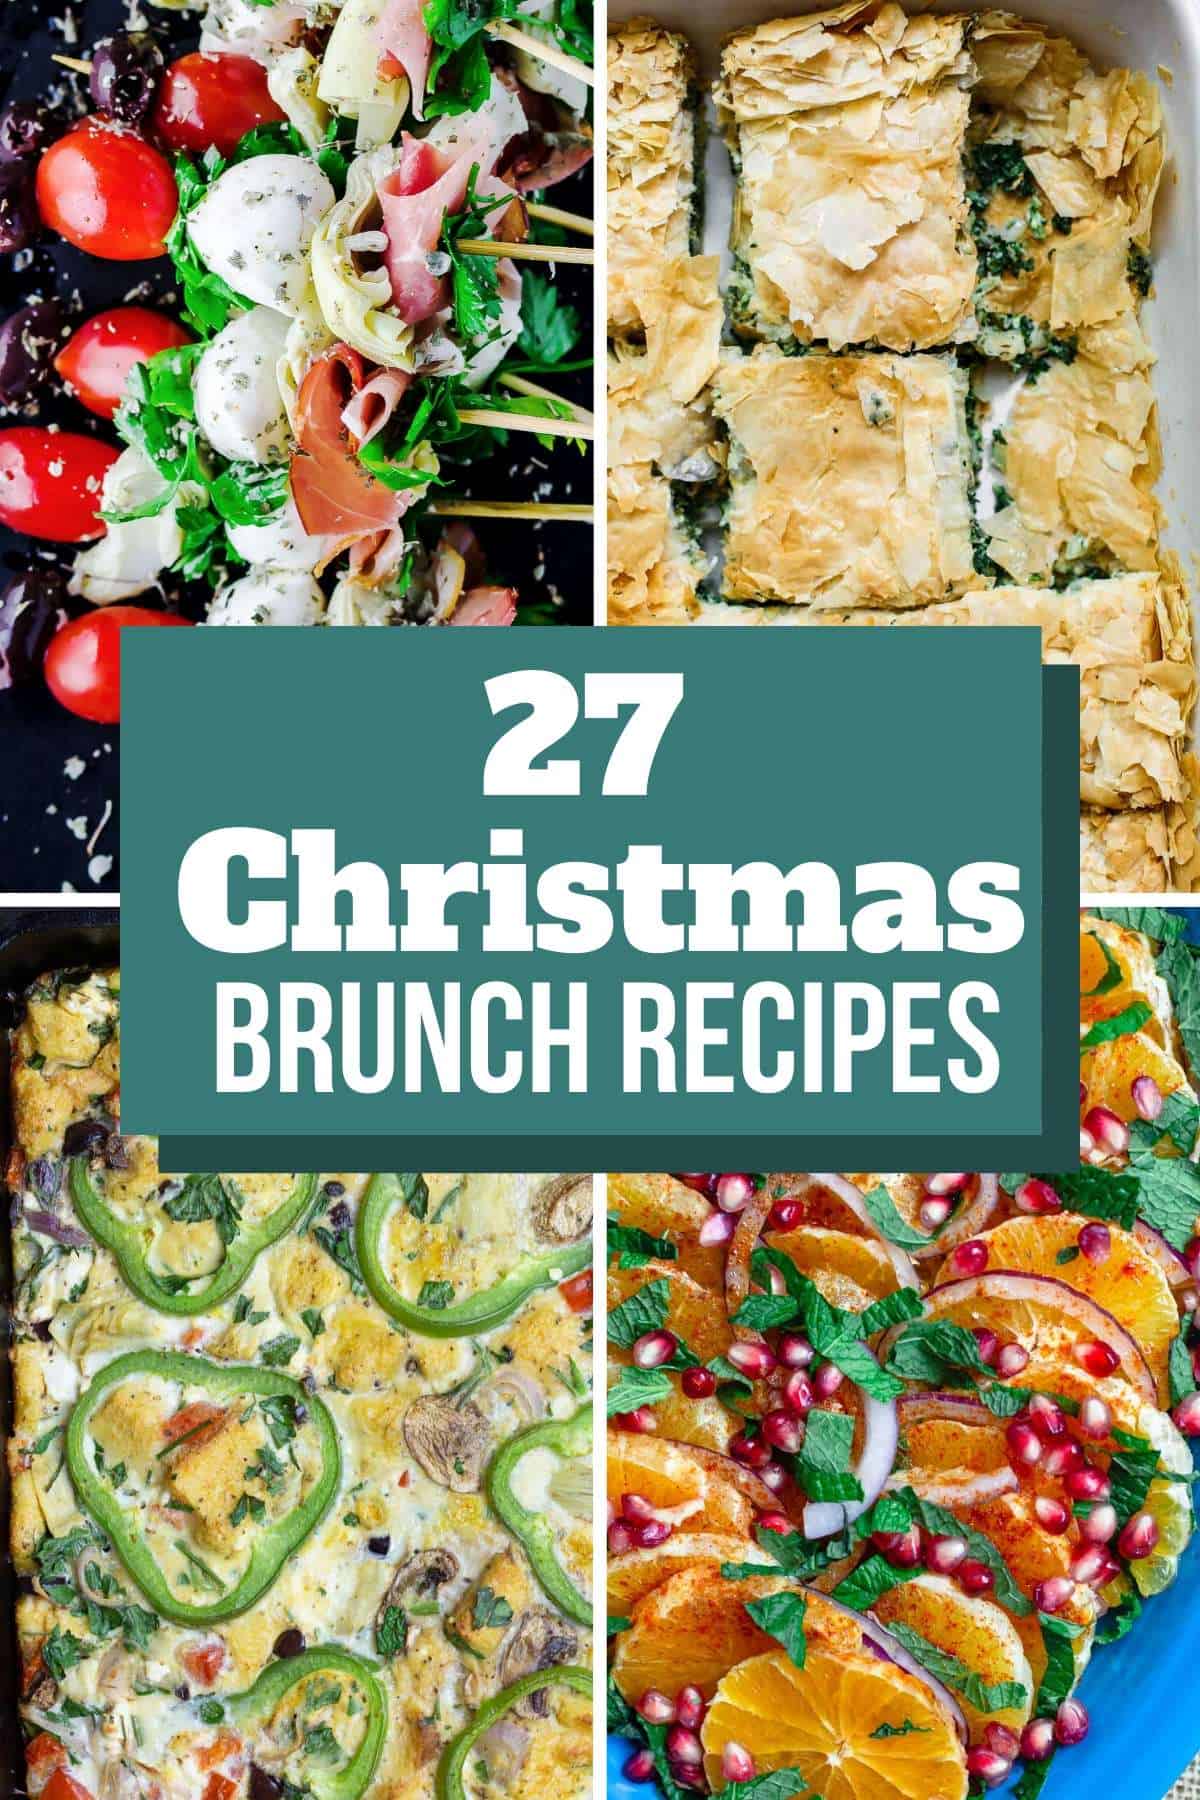 College of photos for Christmas Brunch Recipes